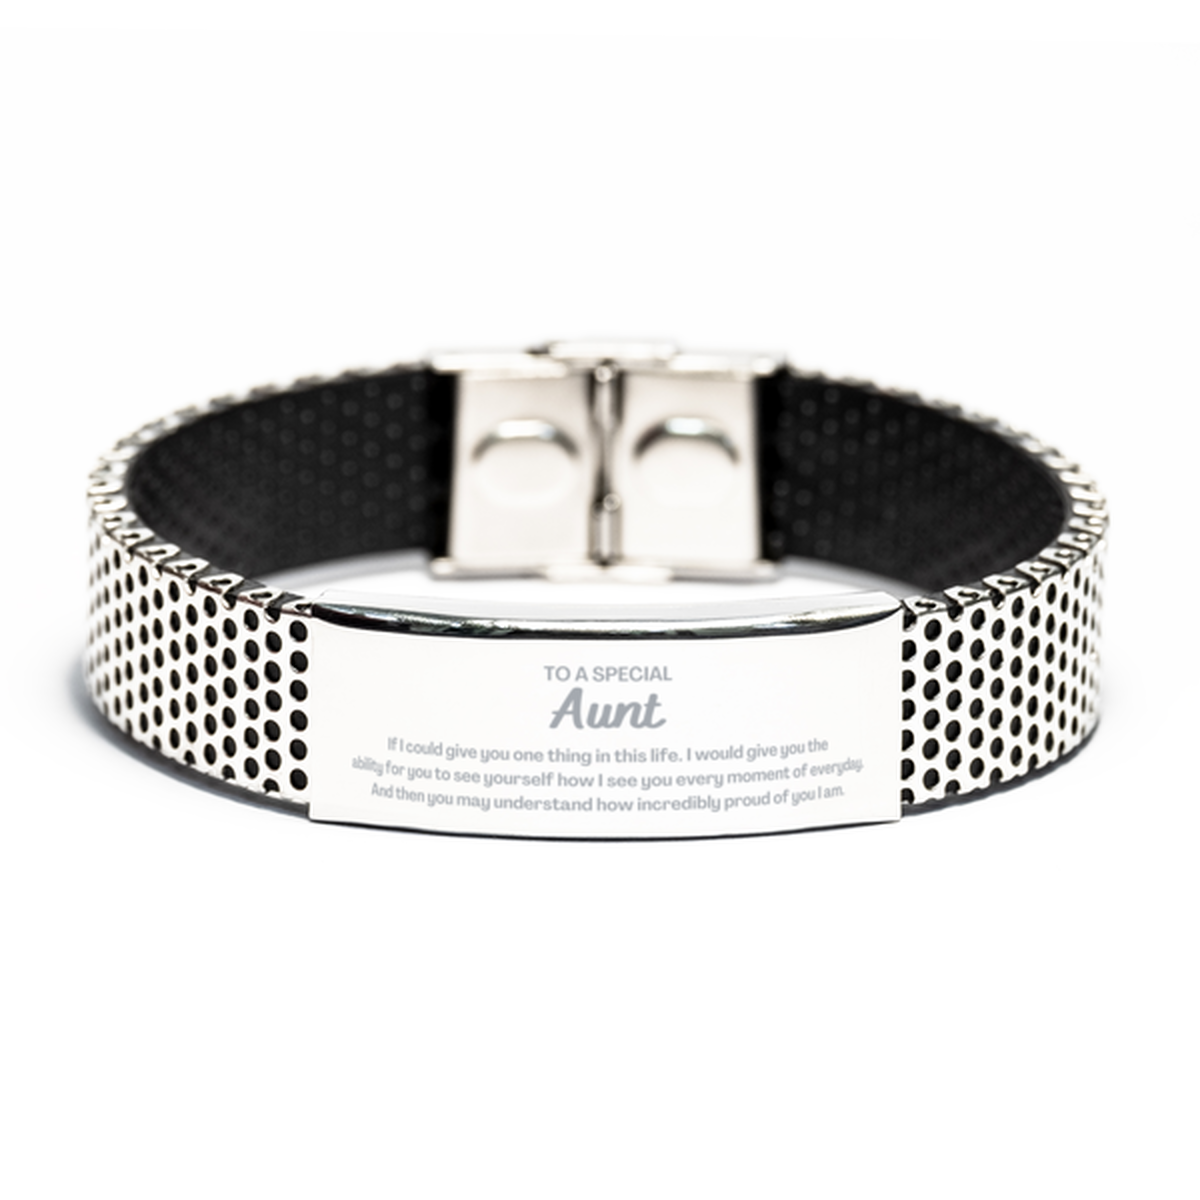 To My Aunt Stainless Steel Bracelet, Gifts For Aunt Engraved, Inspirational Gifts for Christmas Birthday, Epic Gifts for Aunt To A Special Aunt how incredibly proud of you I am